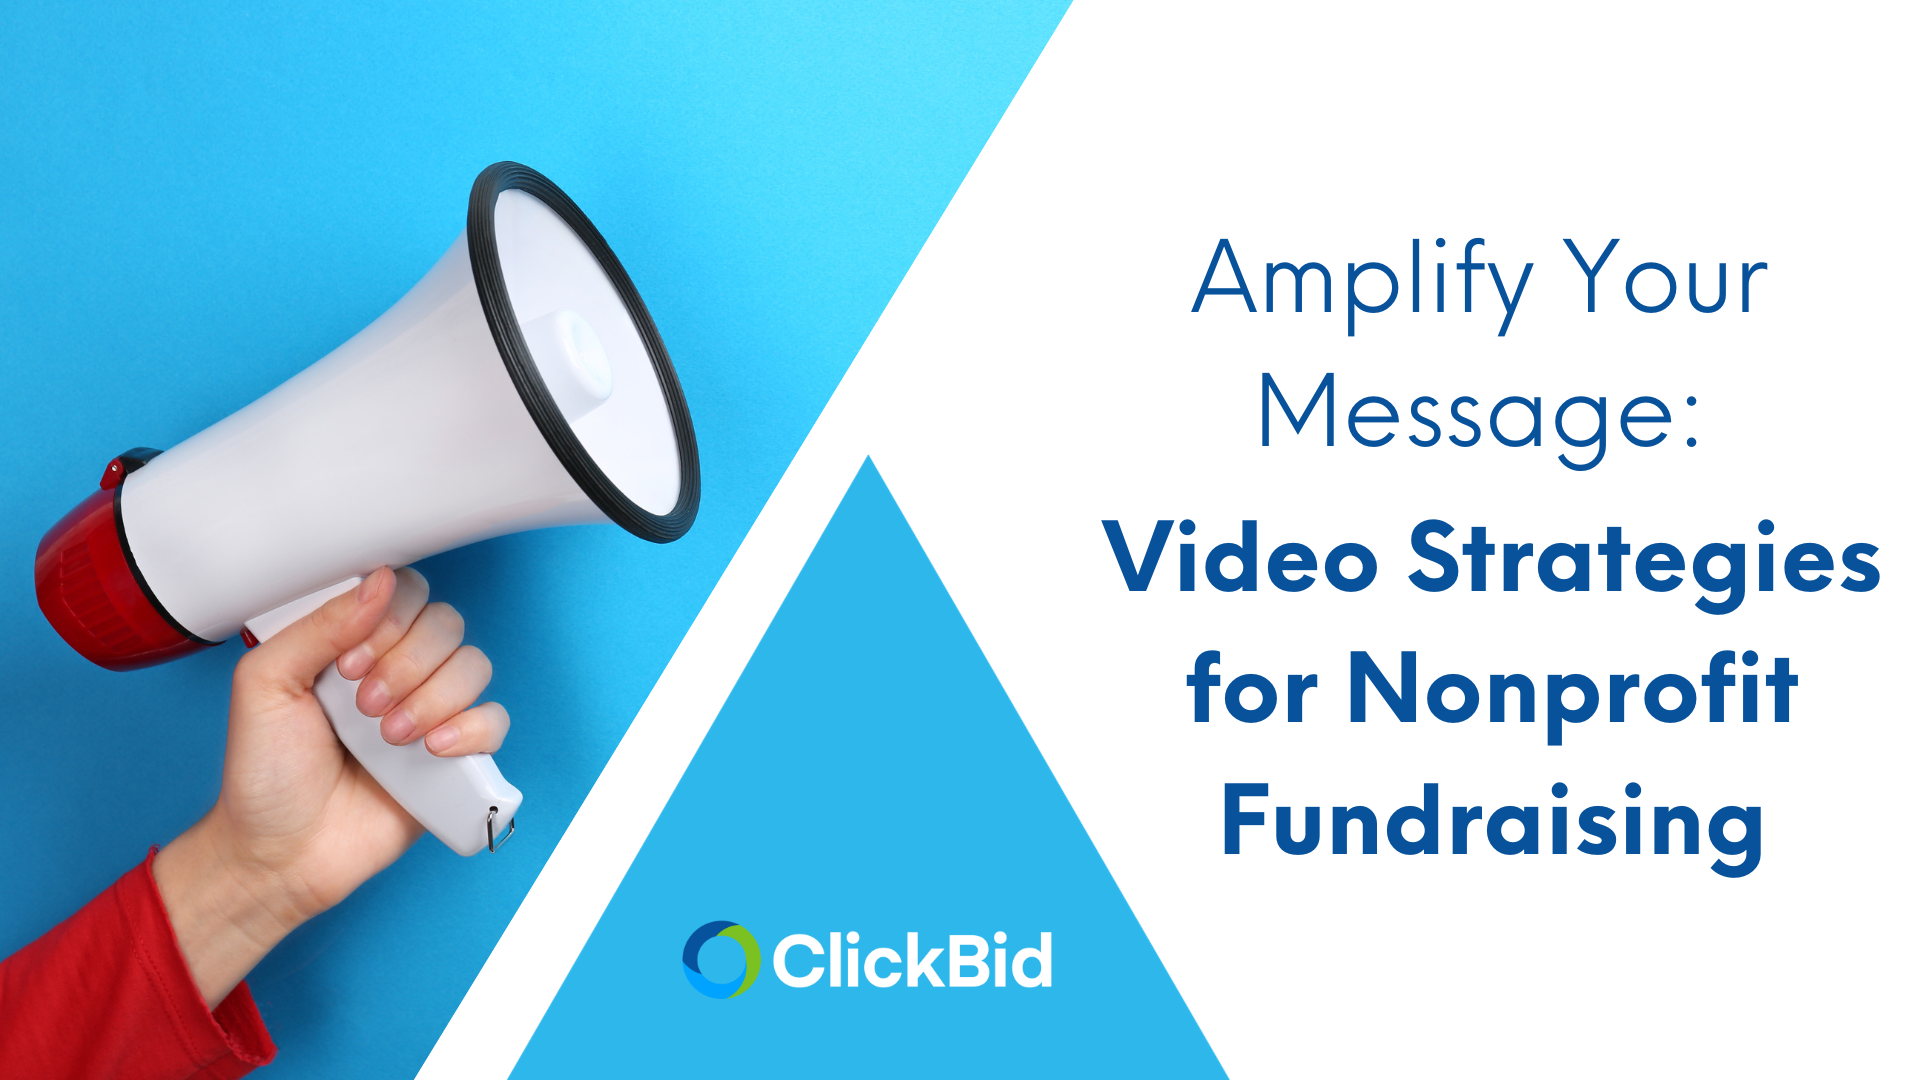 Amplify Your Message: Video Strategies for Nonprofit Fundraising